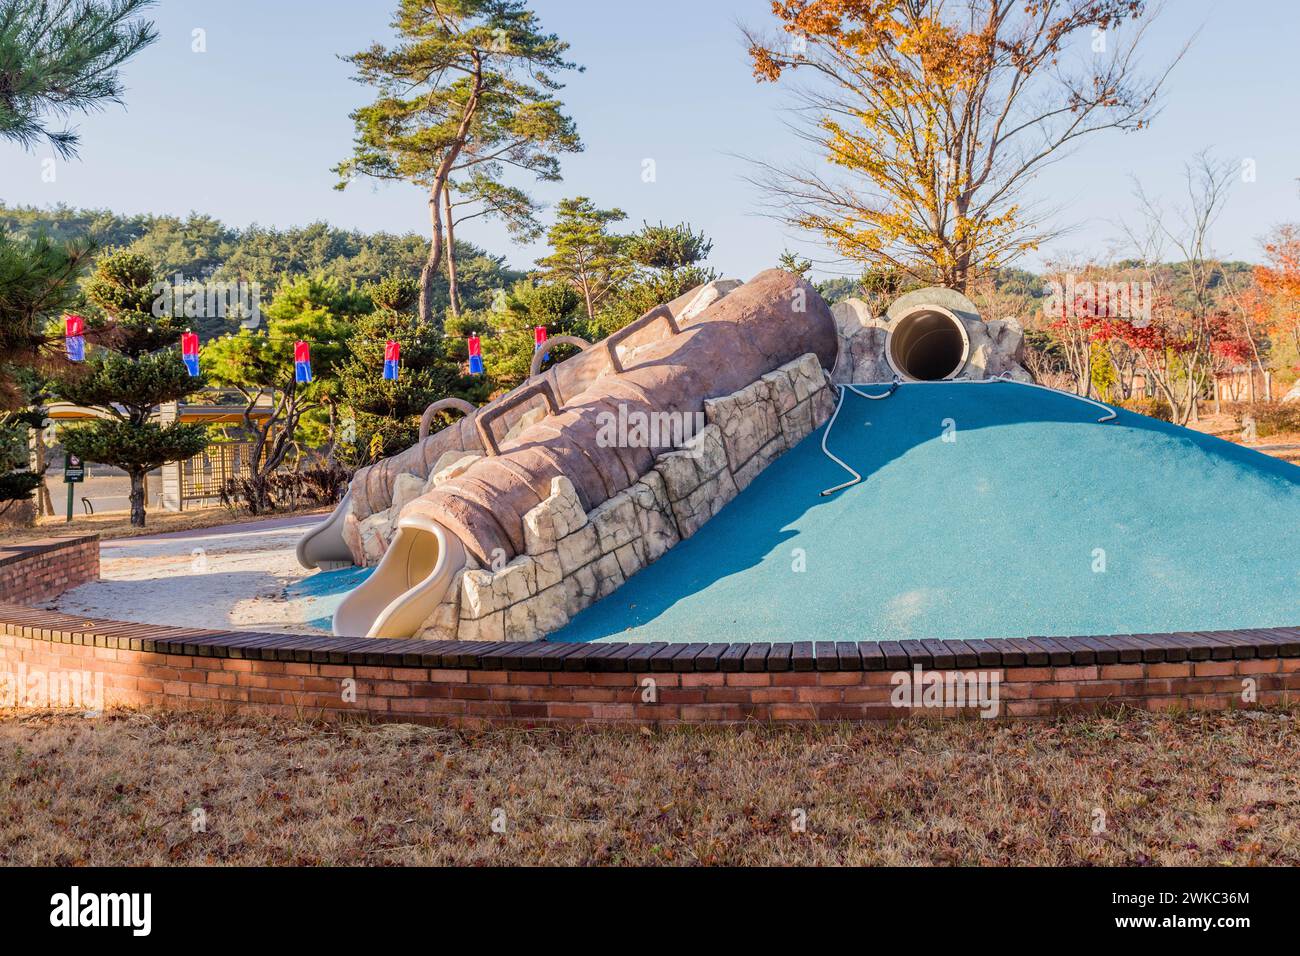 Playground slides in wilderness park in Pohang, South Korea Stock Photo